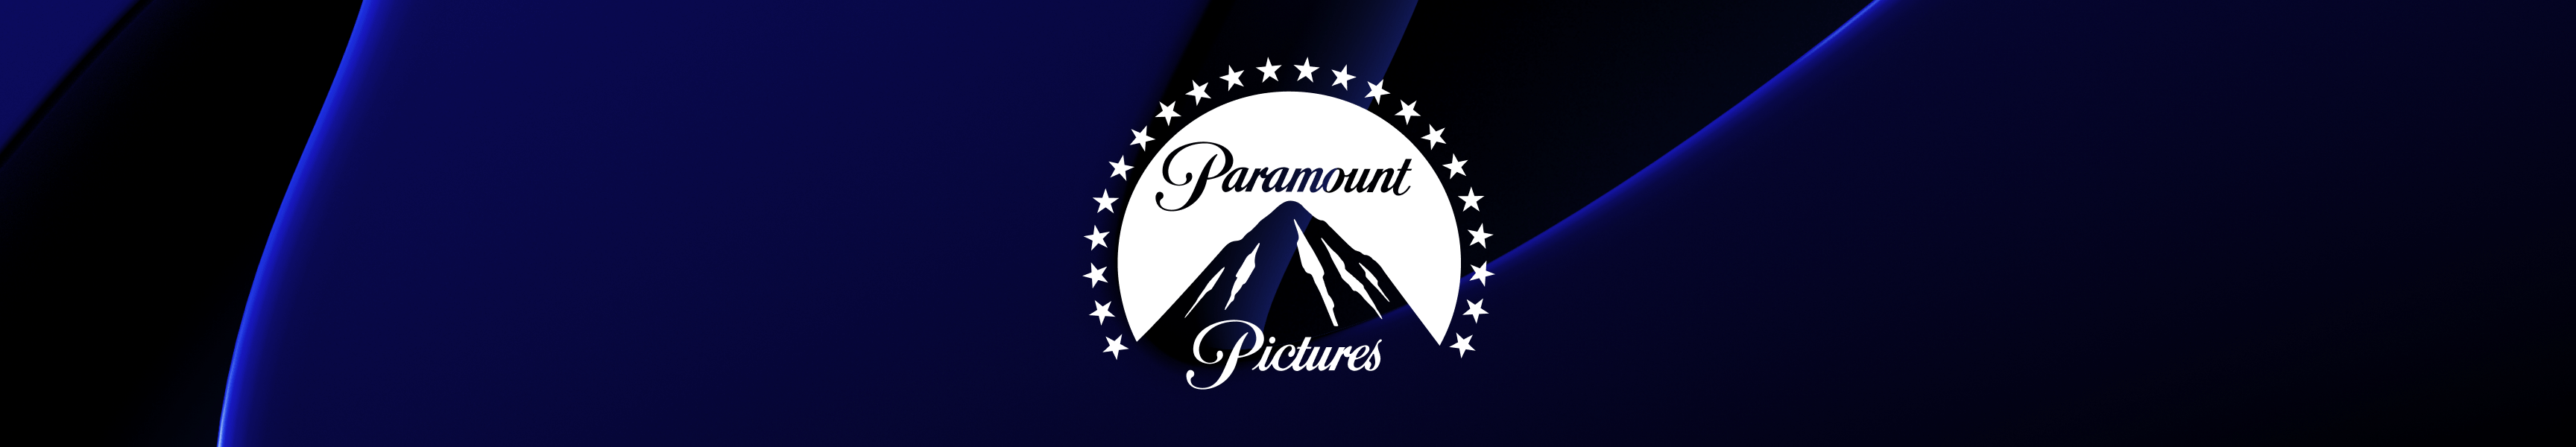 Paramount Pictures Home & Office